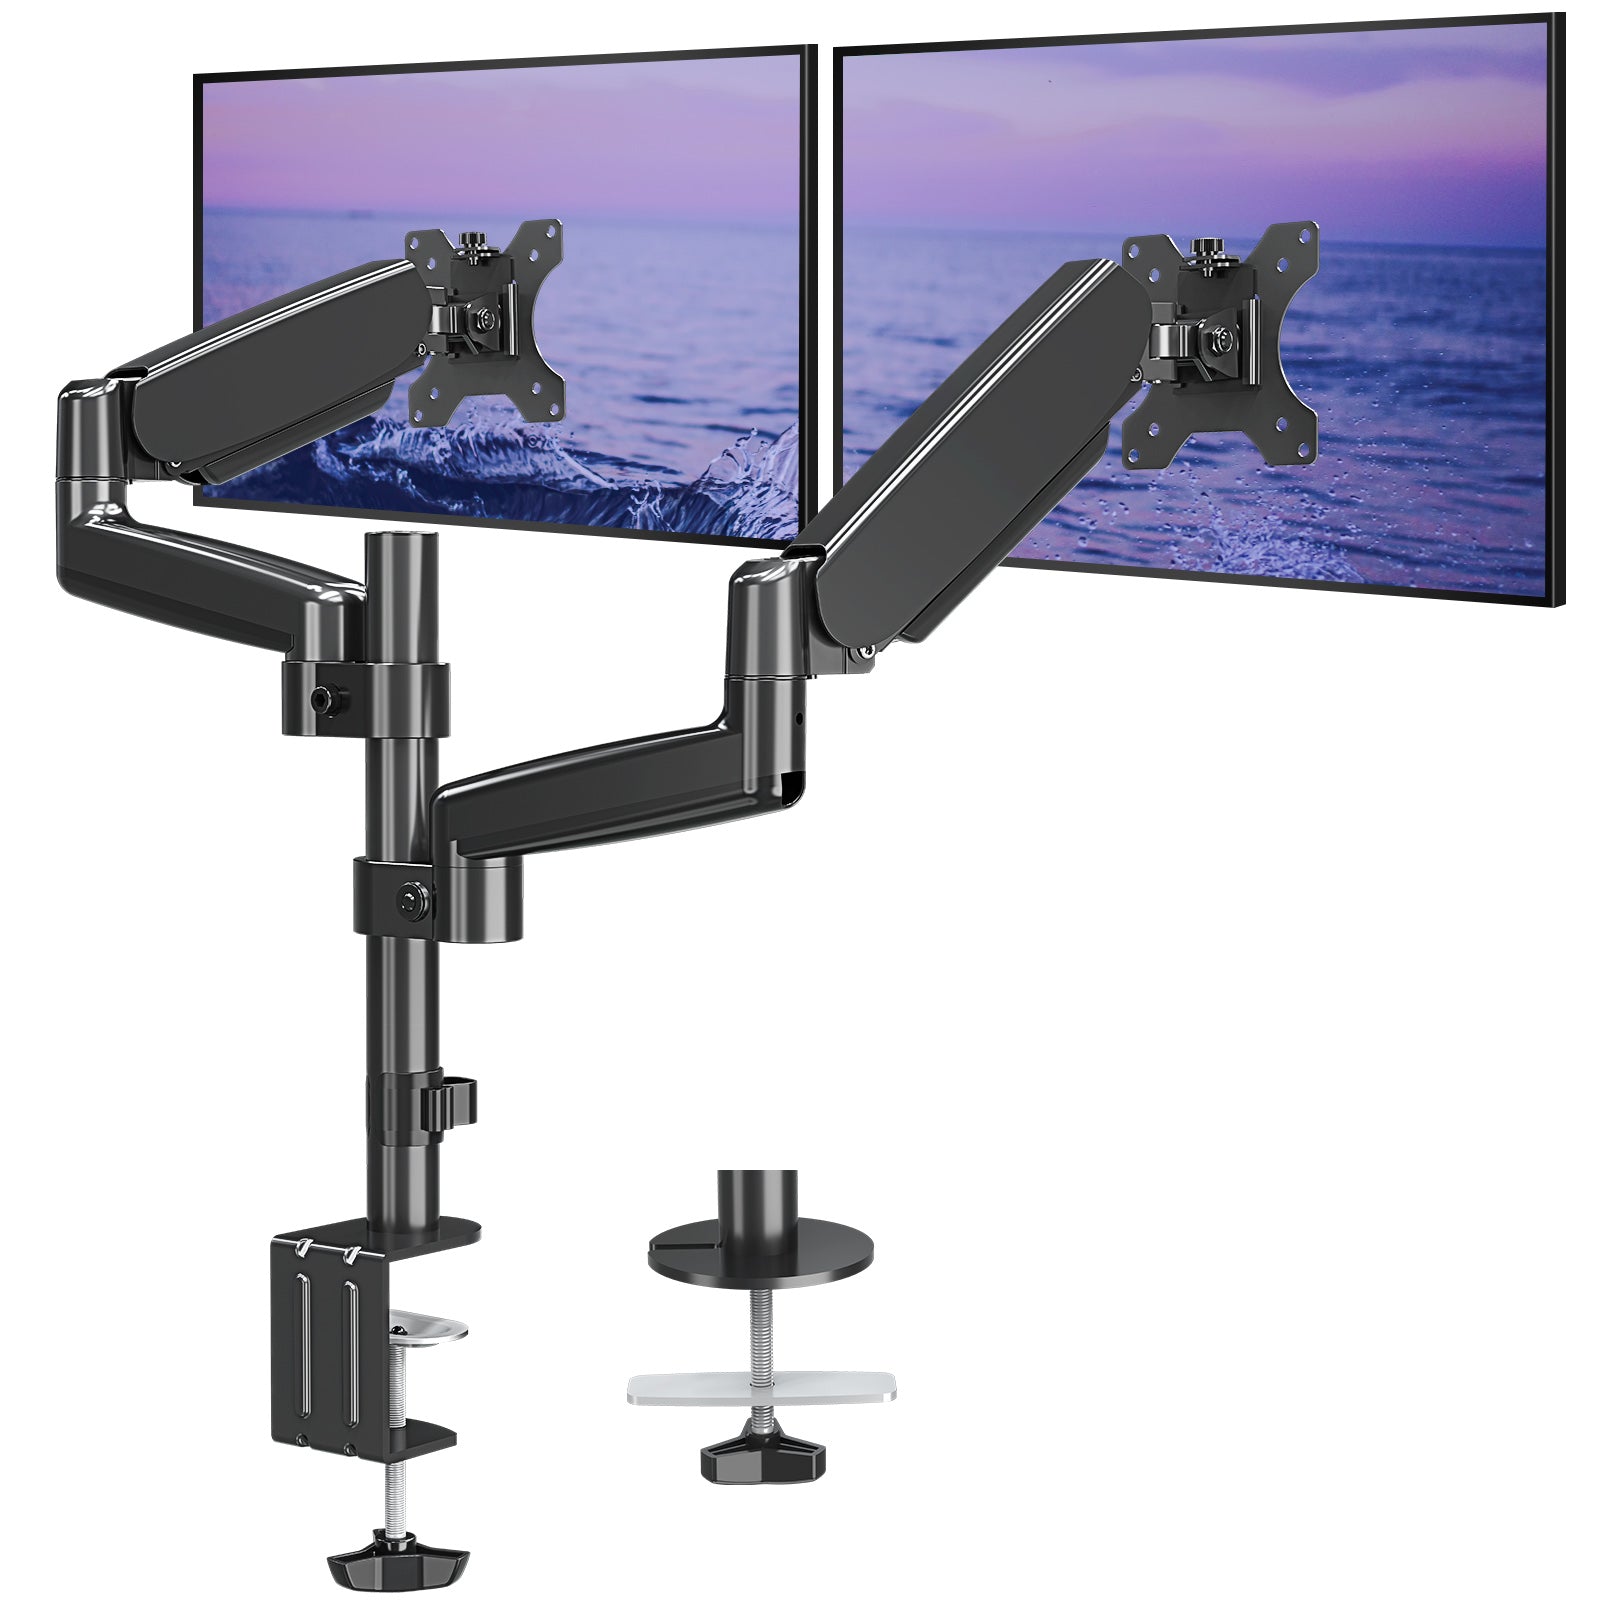 Mount Pro Adjustable Monitor Stand with Gas Spring Arm – WOKA